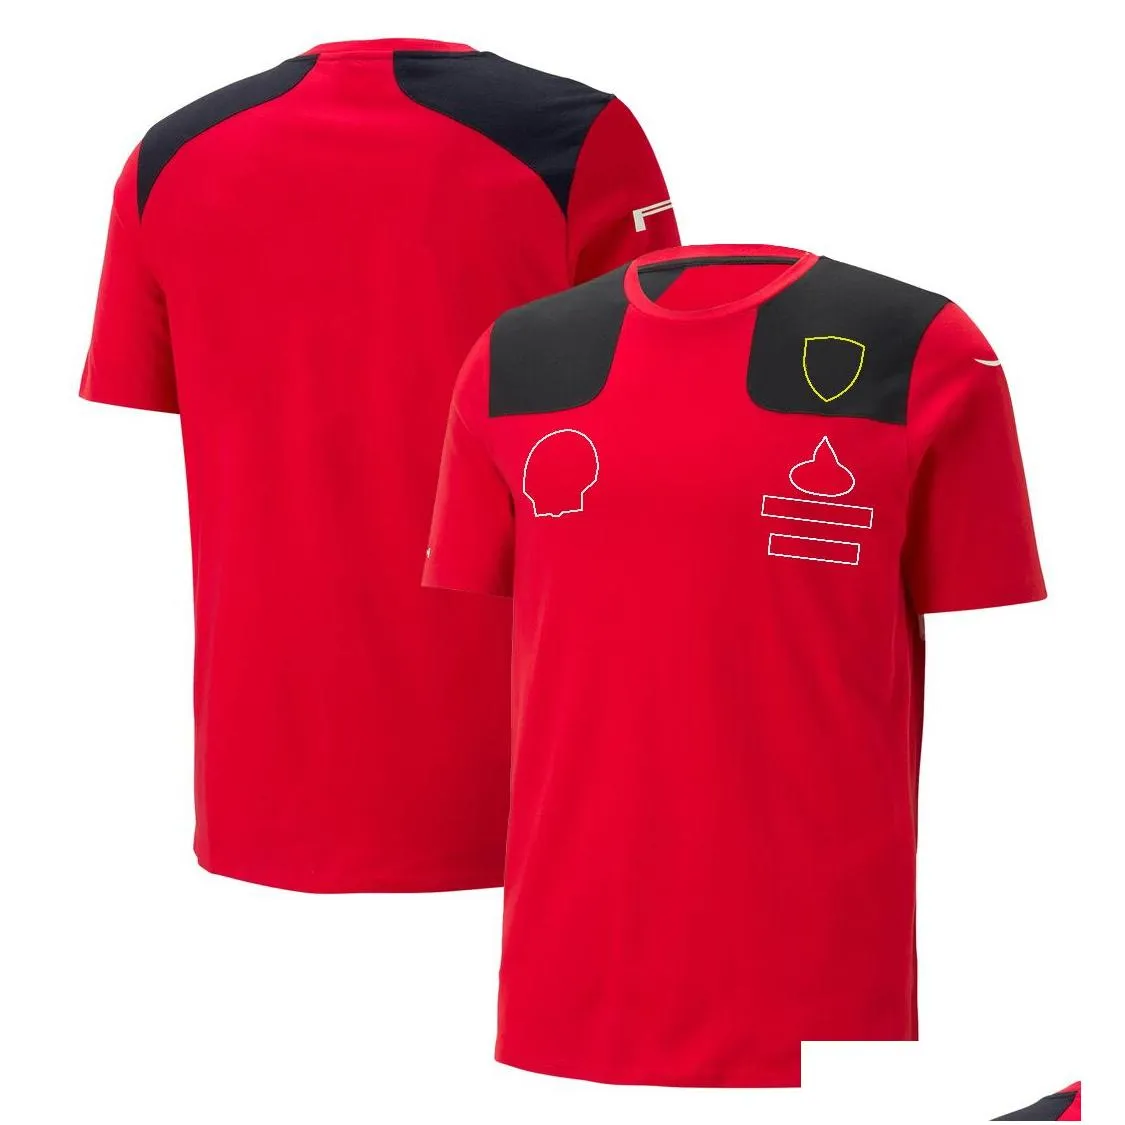 2023 the most new product f1 formula one red team clothing racing suit lapel polo shirt clothes team work clothes short sleeve tshirt men